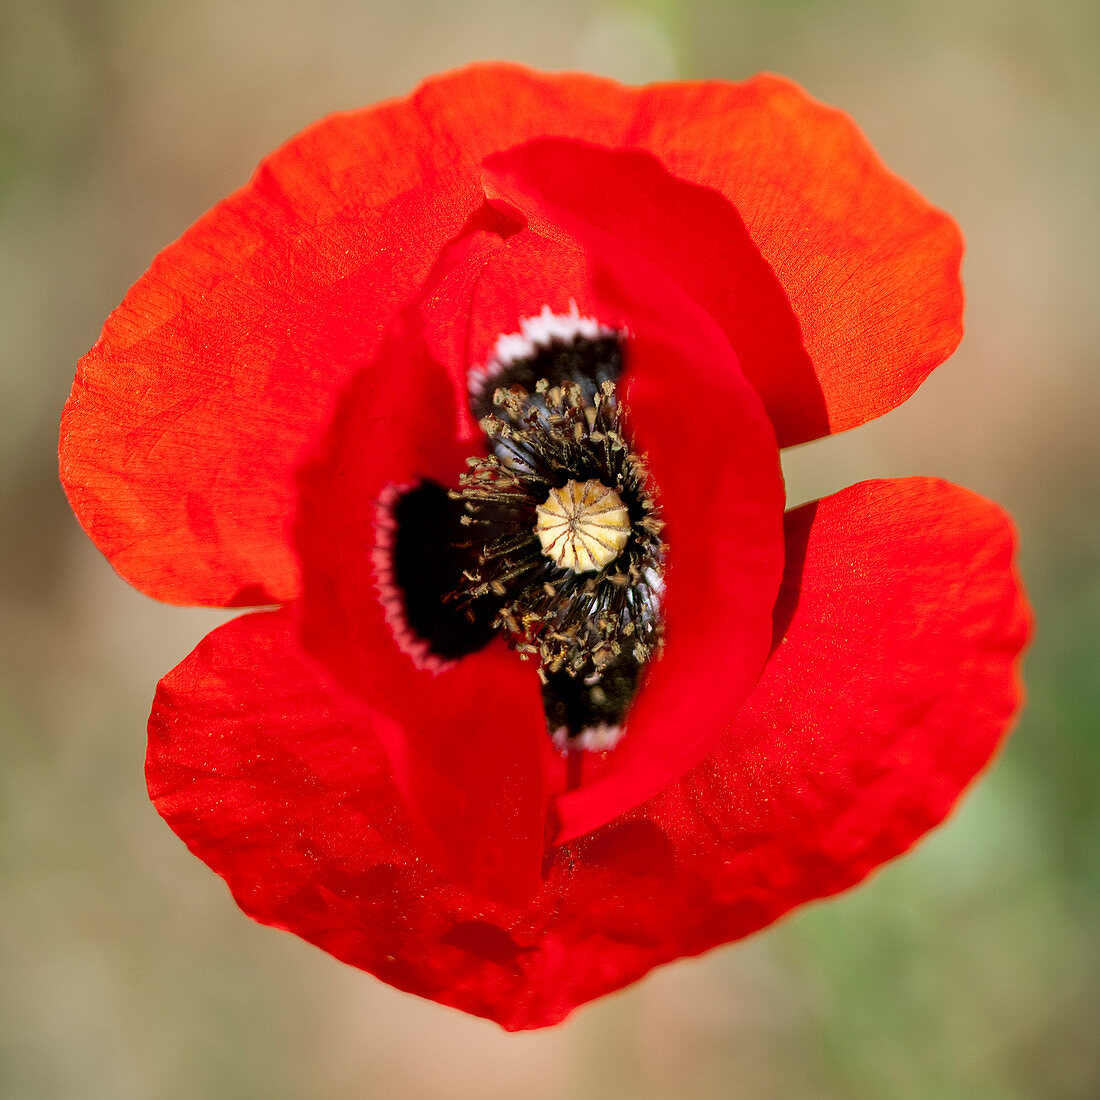 Extreme close up of red poppy flower